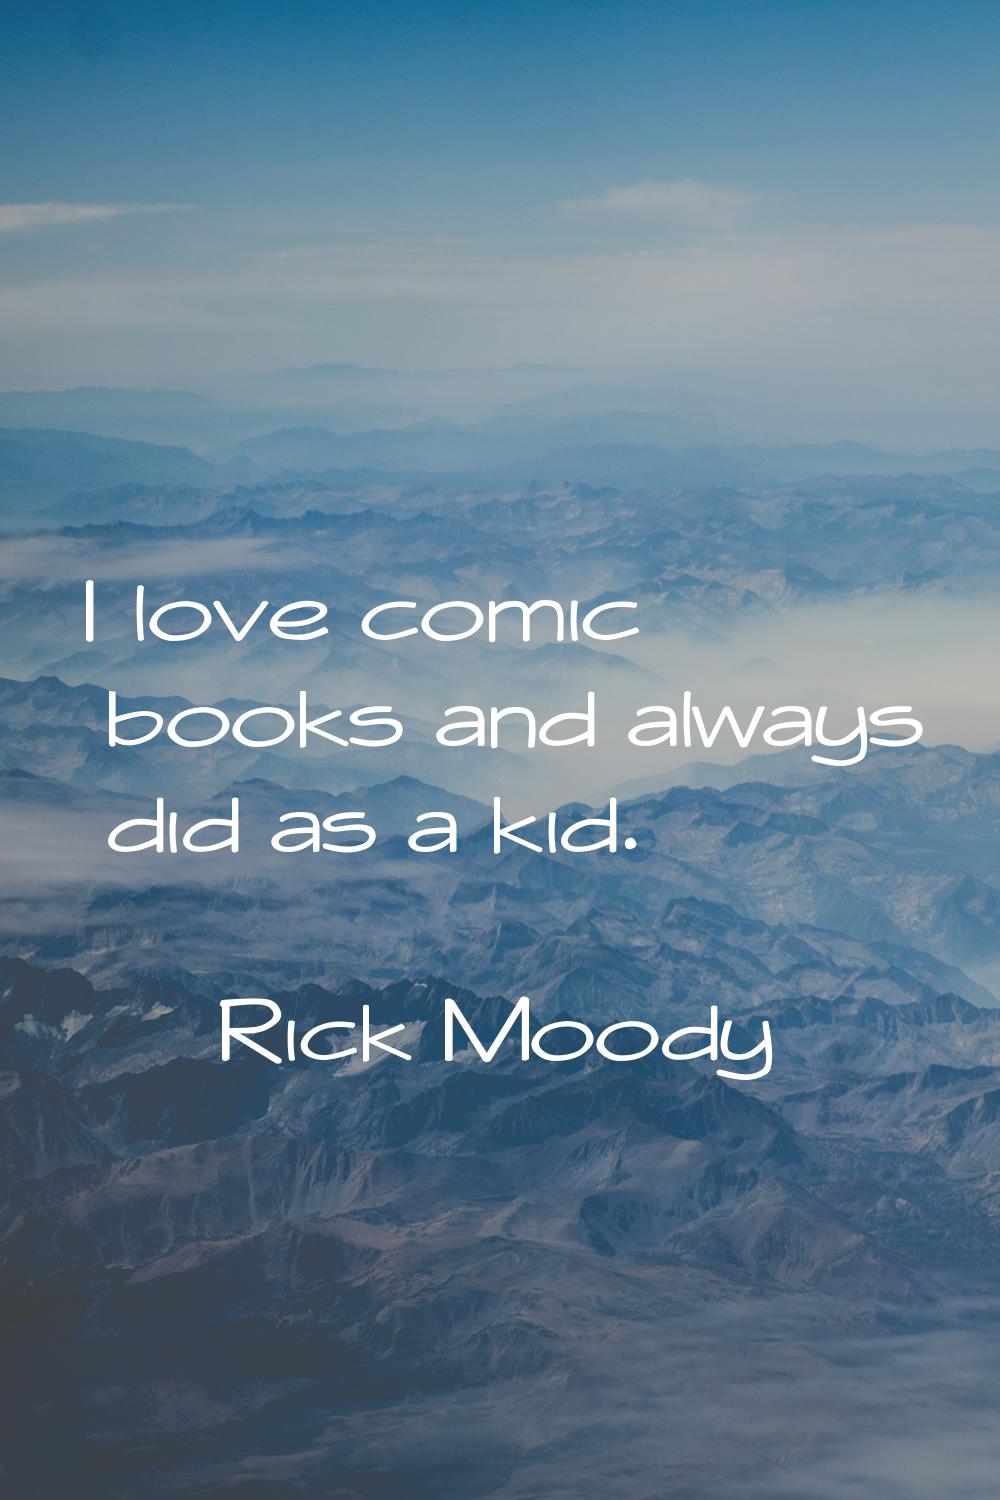 I love comic books and always did as a kid.